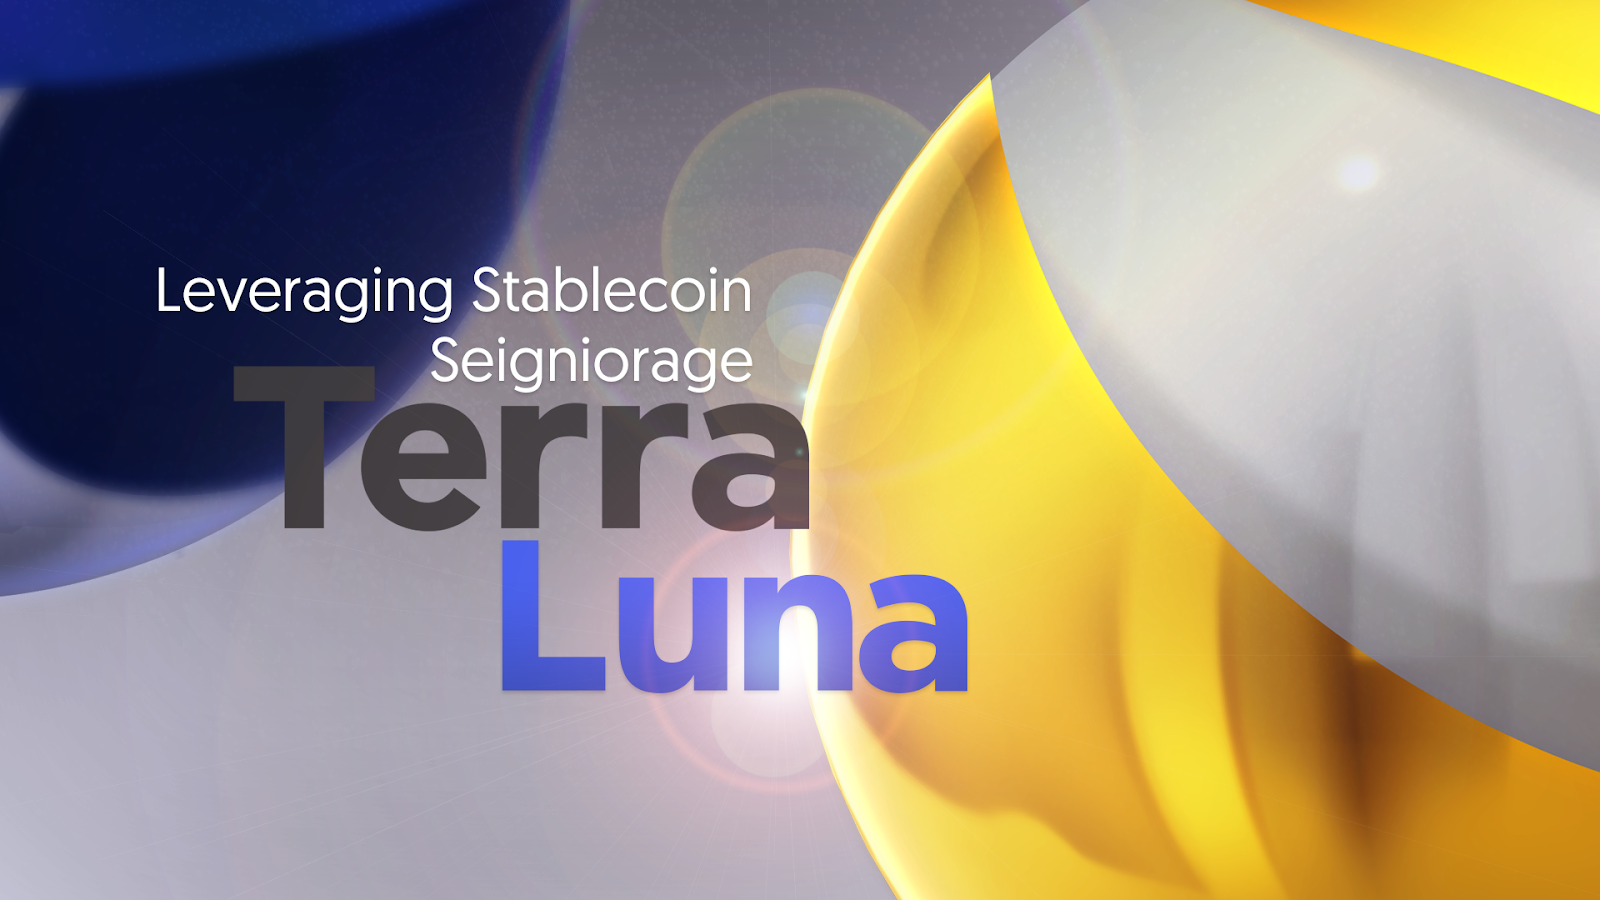 Leveraging Stablecoin Seigniorage with Terra and Luna ...